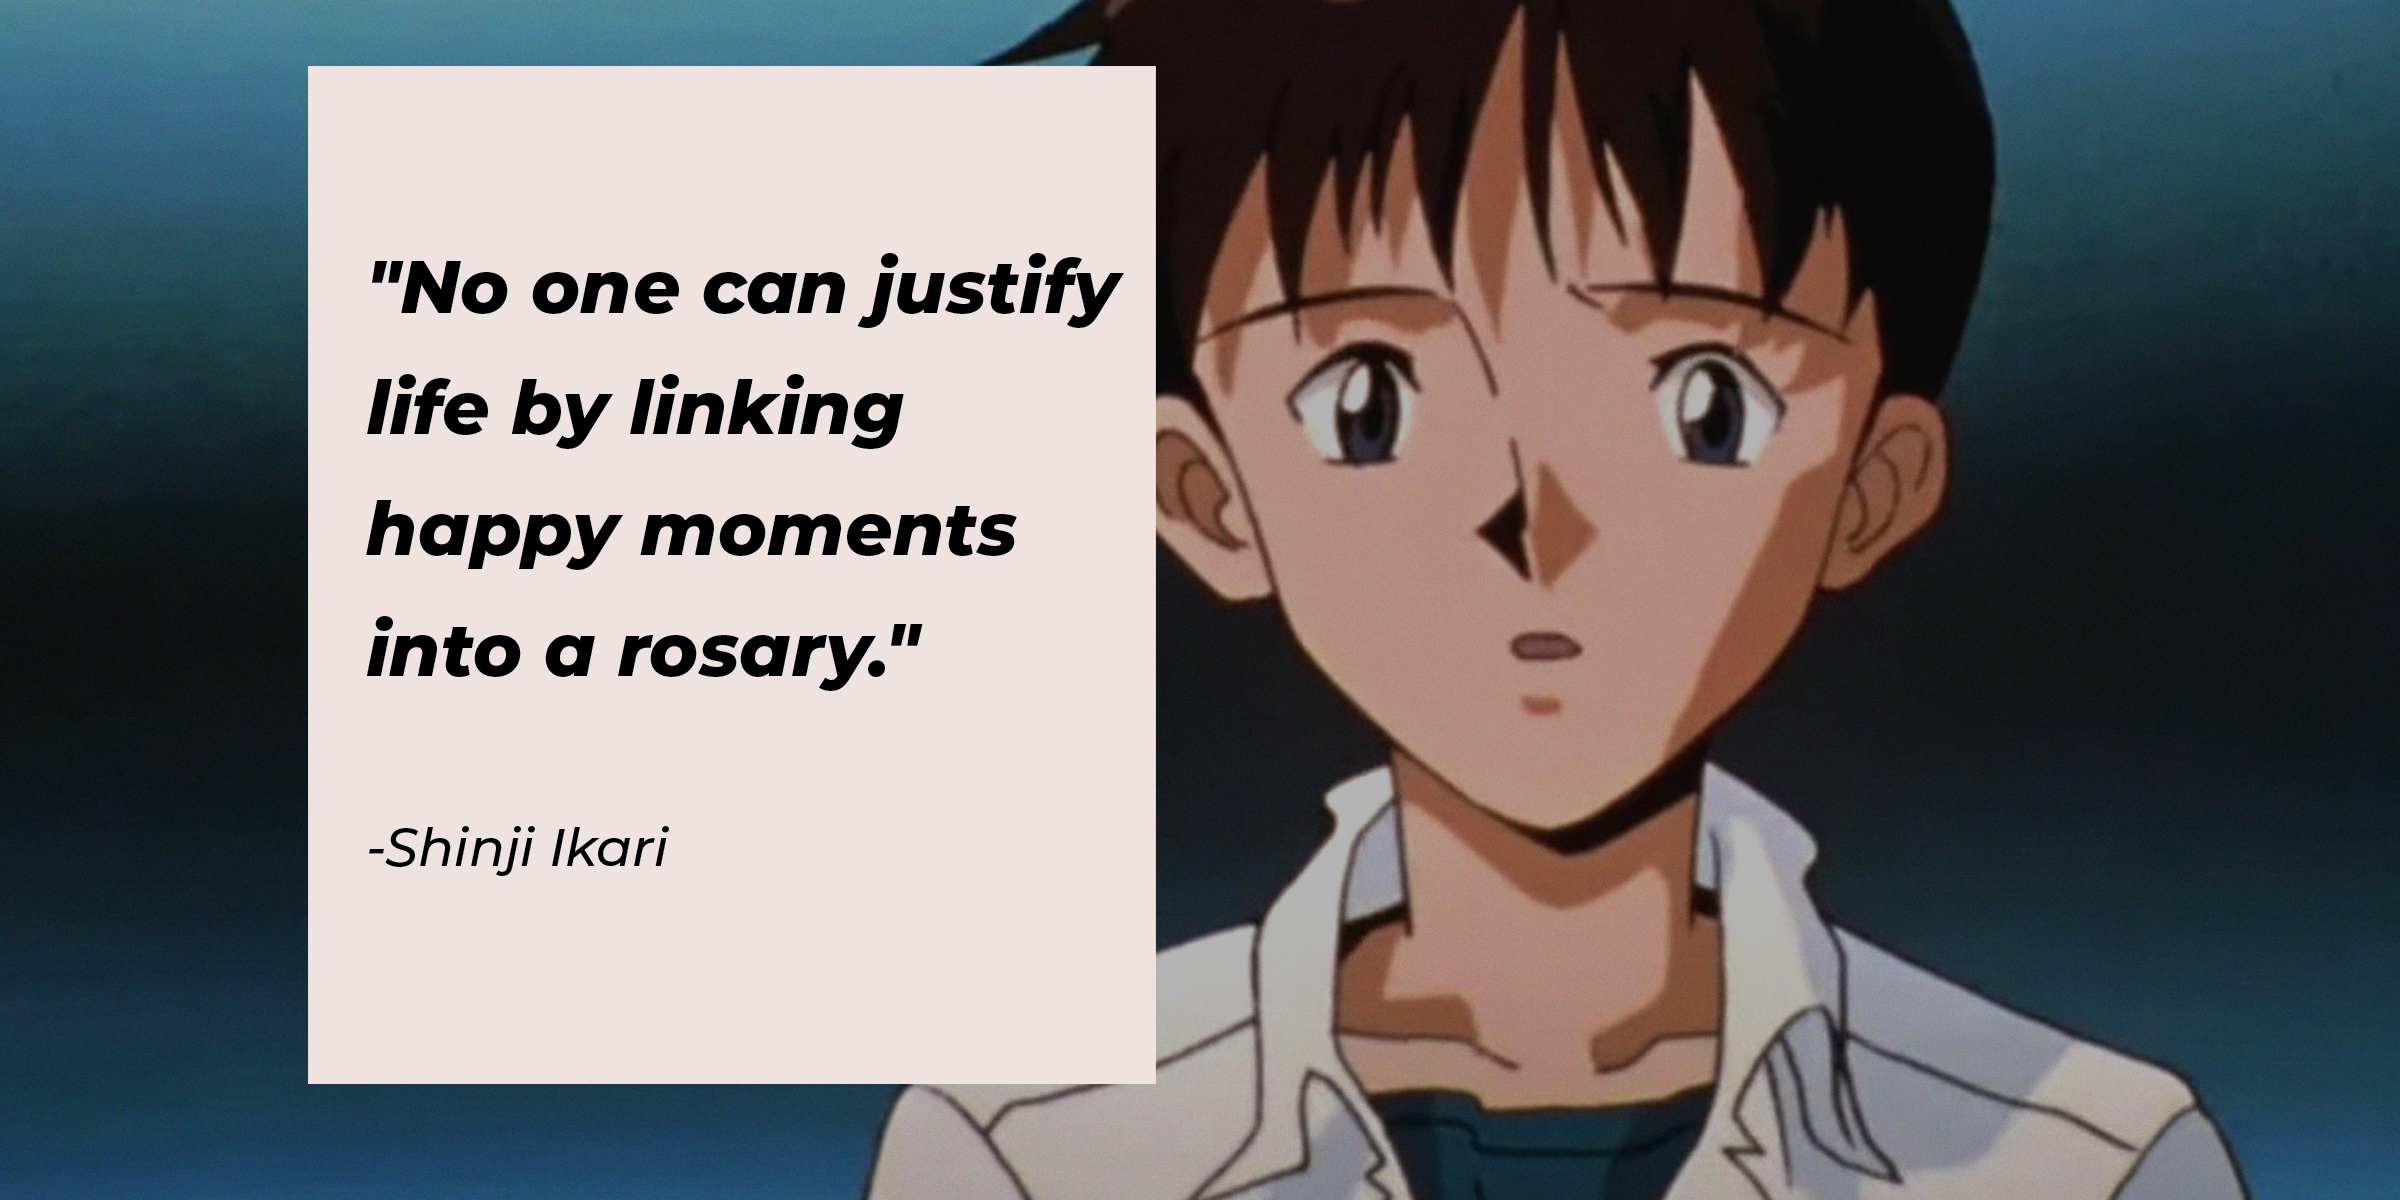 Photo of Shinji Ikari with the quote: "No one can justify life by linking happy moments into a rosary." | Source: Facebook.com/EvangelionMovie